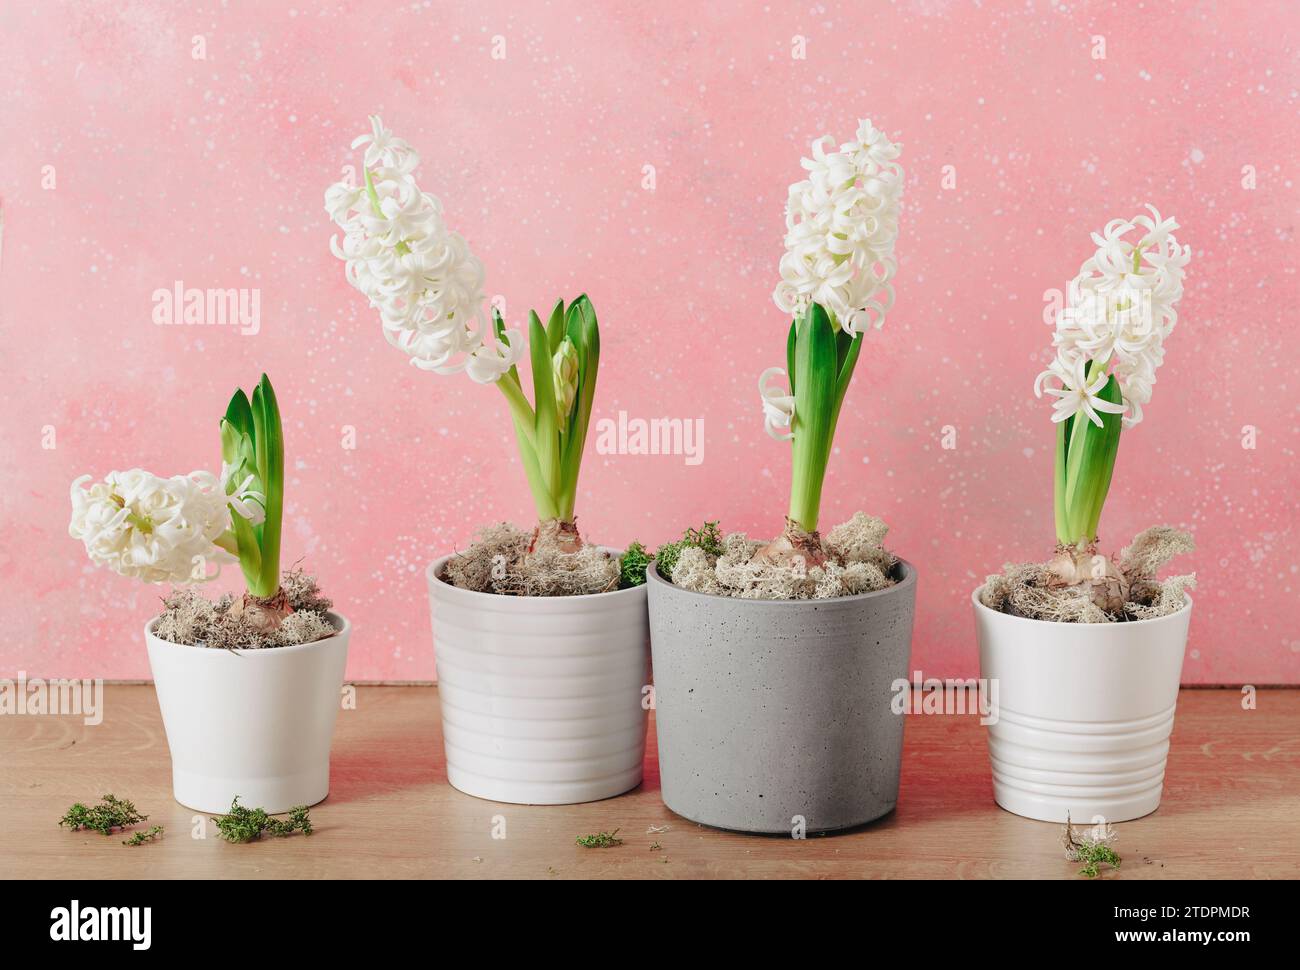 white pink hyacinth traditional winter christmas or spring flower Stock Photo